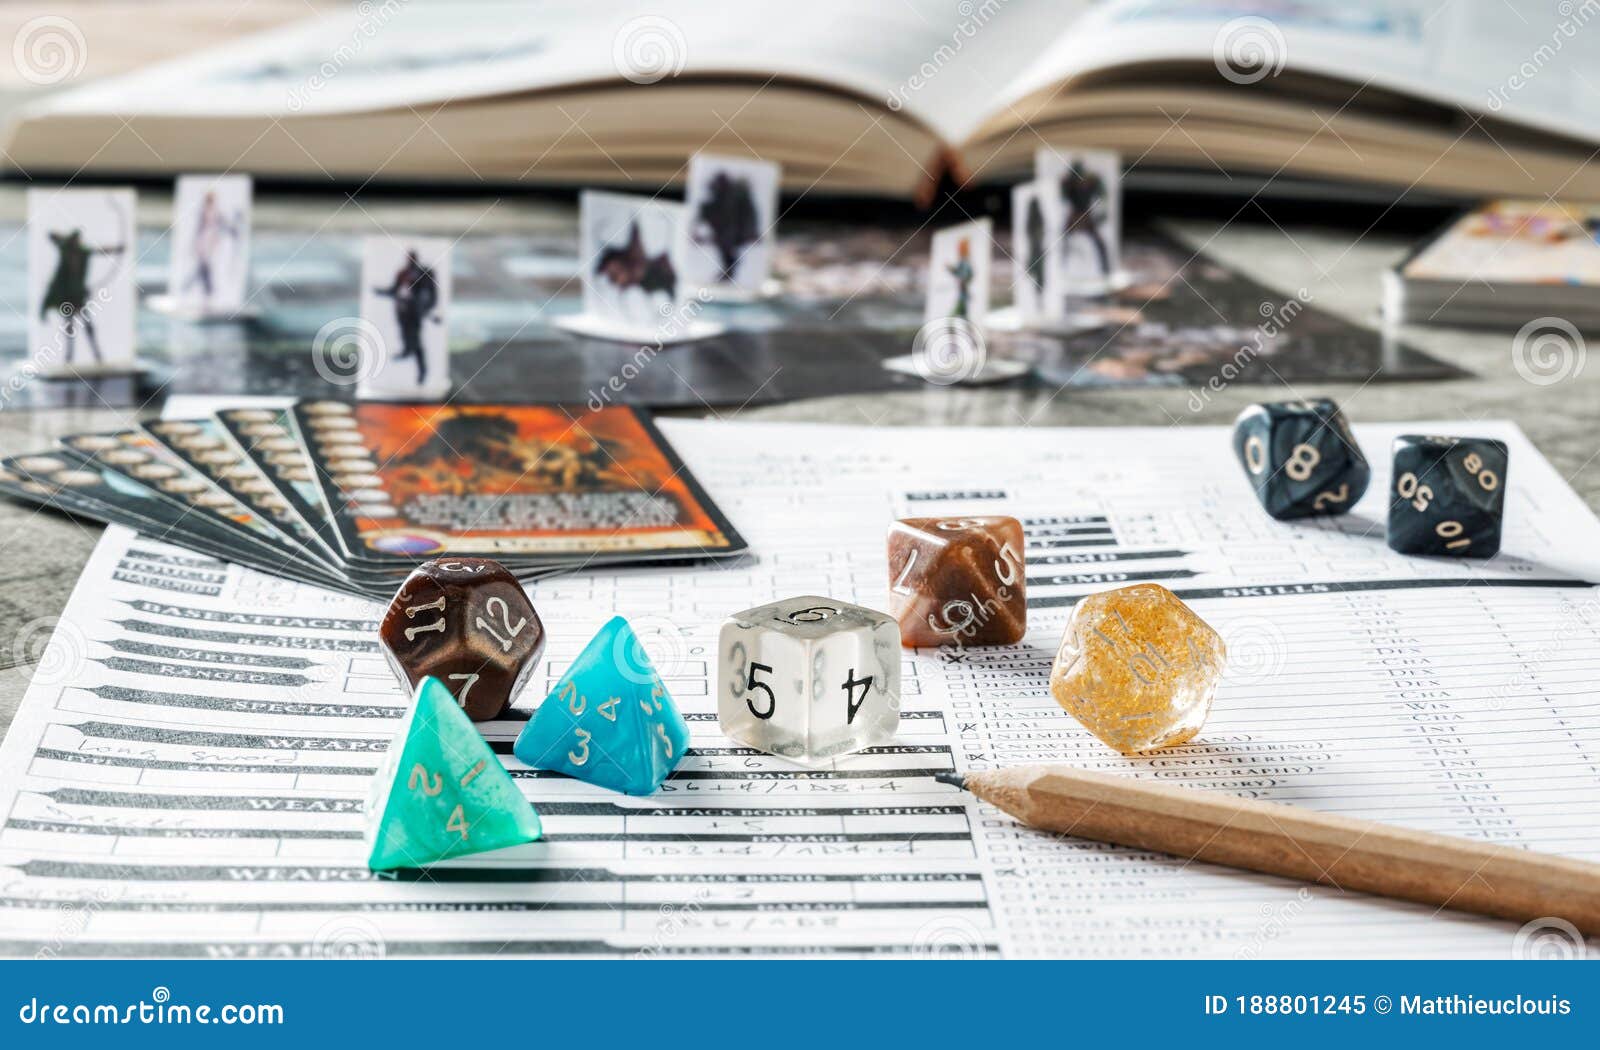 Role Playing Game Set Up Rpg Concept Stock Image Image Of